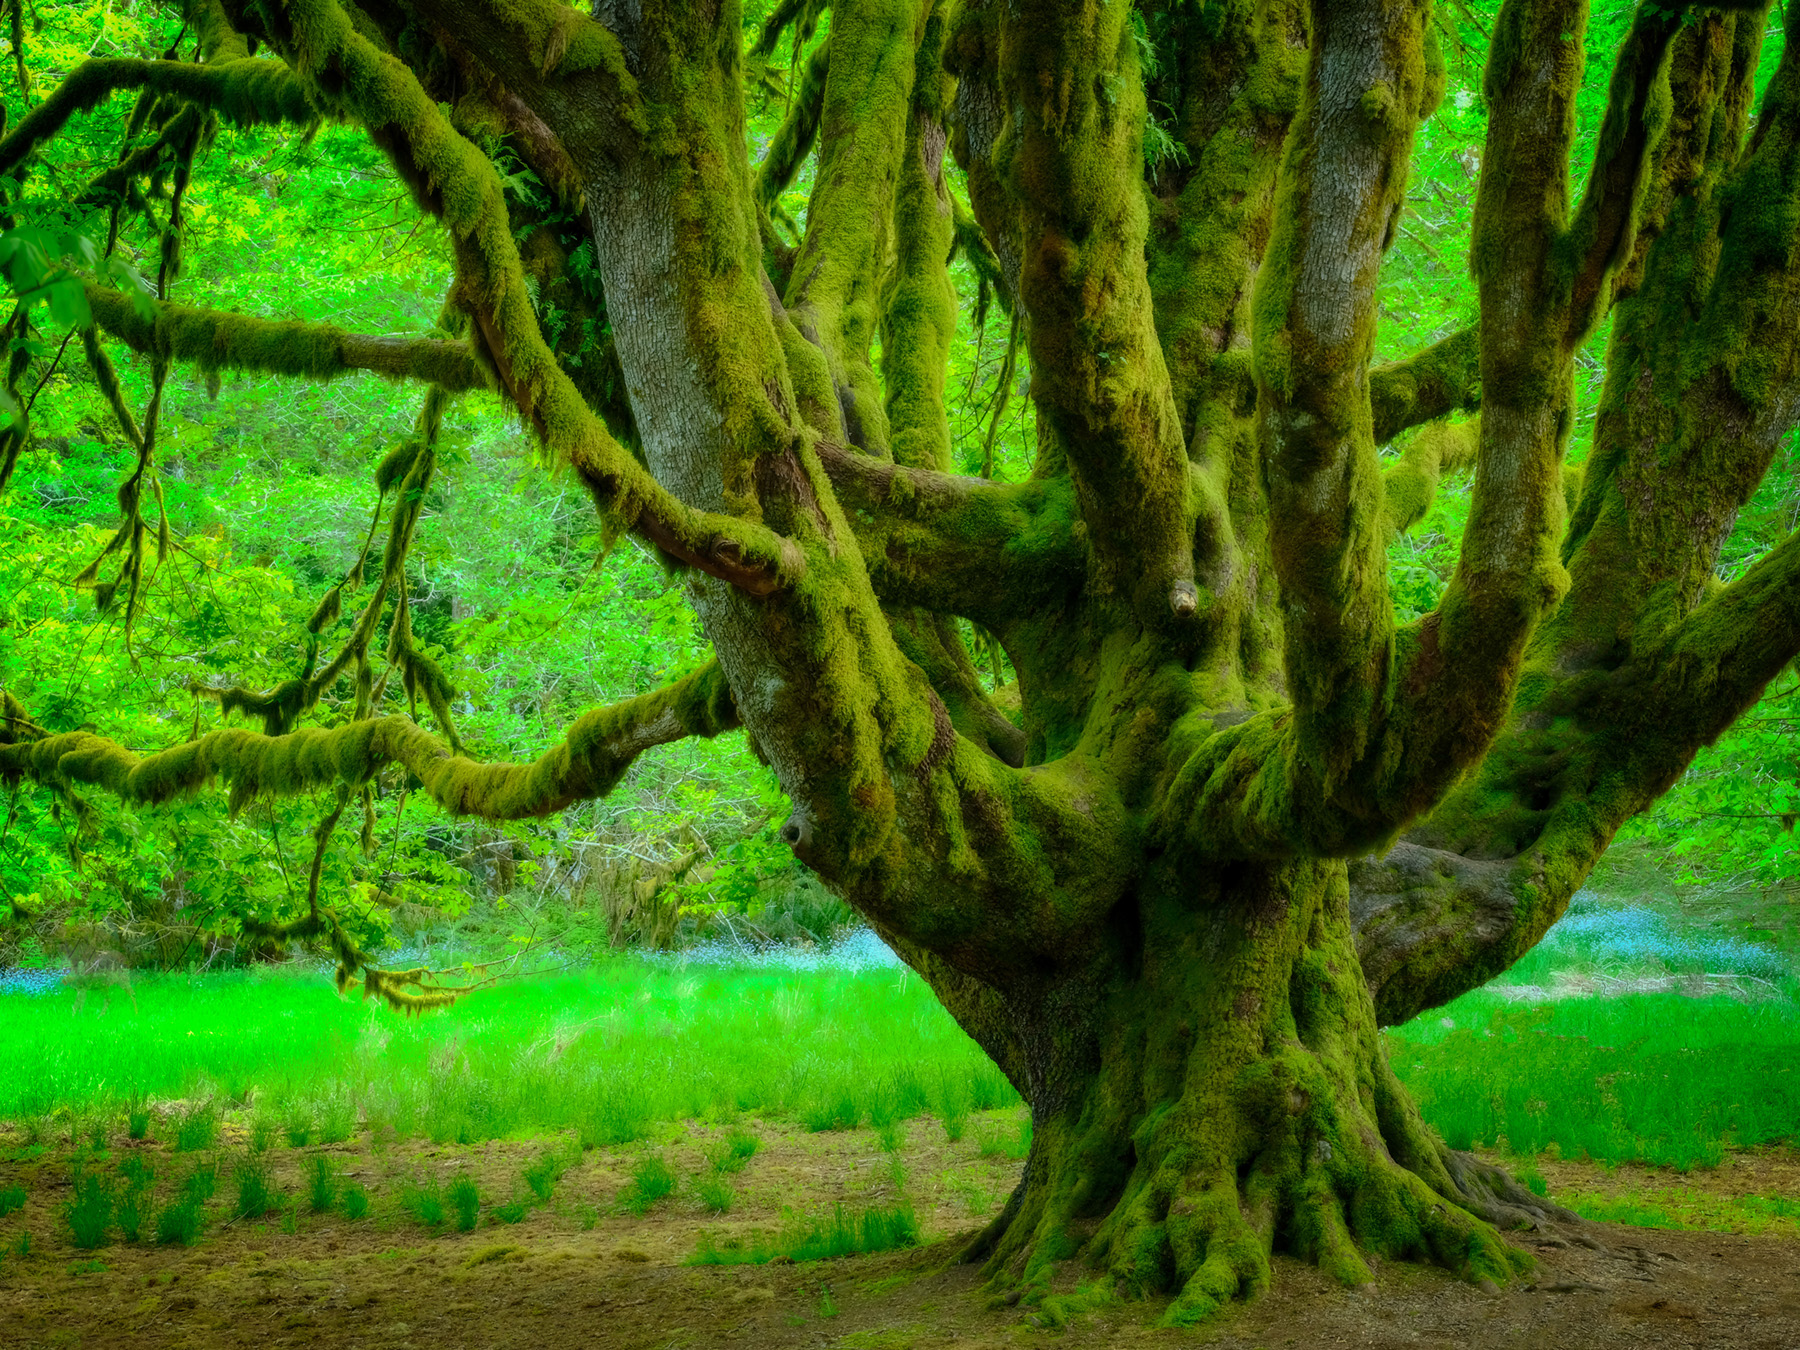 A maple tree in Olympic National Park